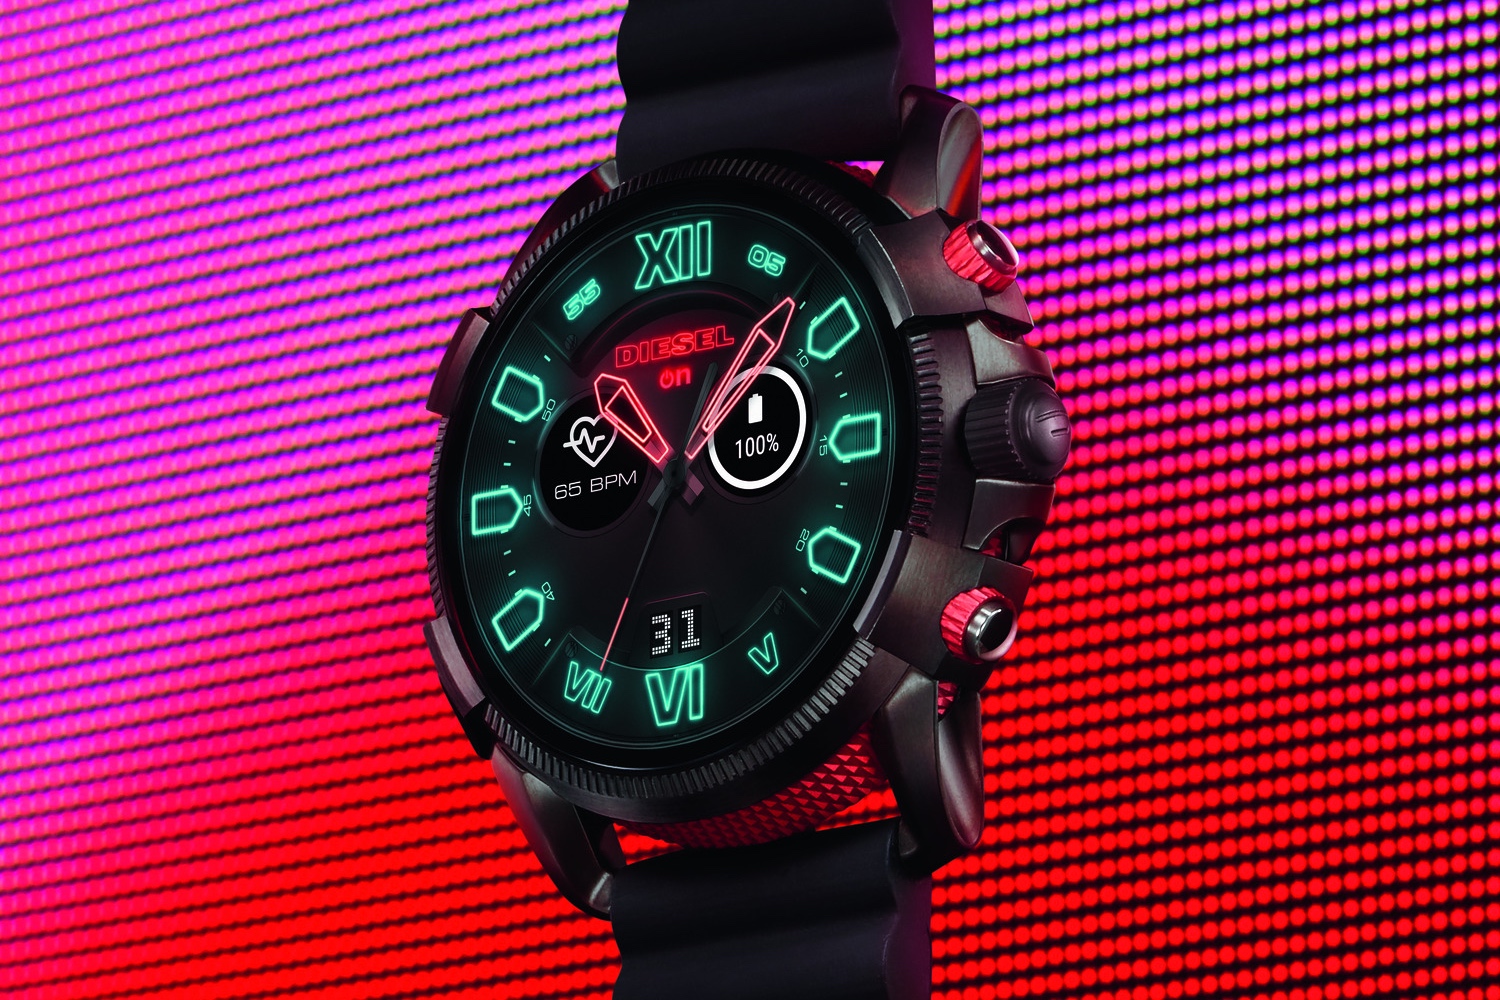 Forget Version 2.0: Diesel's New Watch Is So Advanced, It's